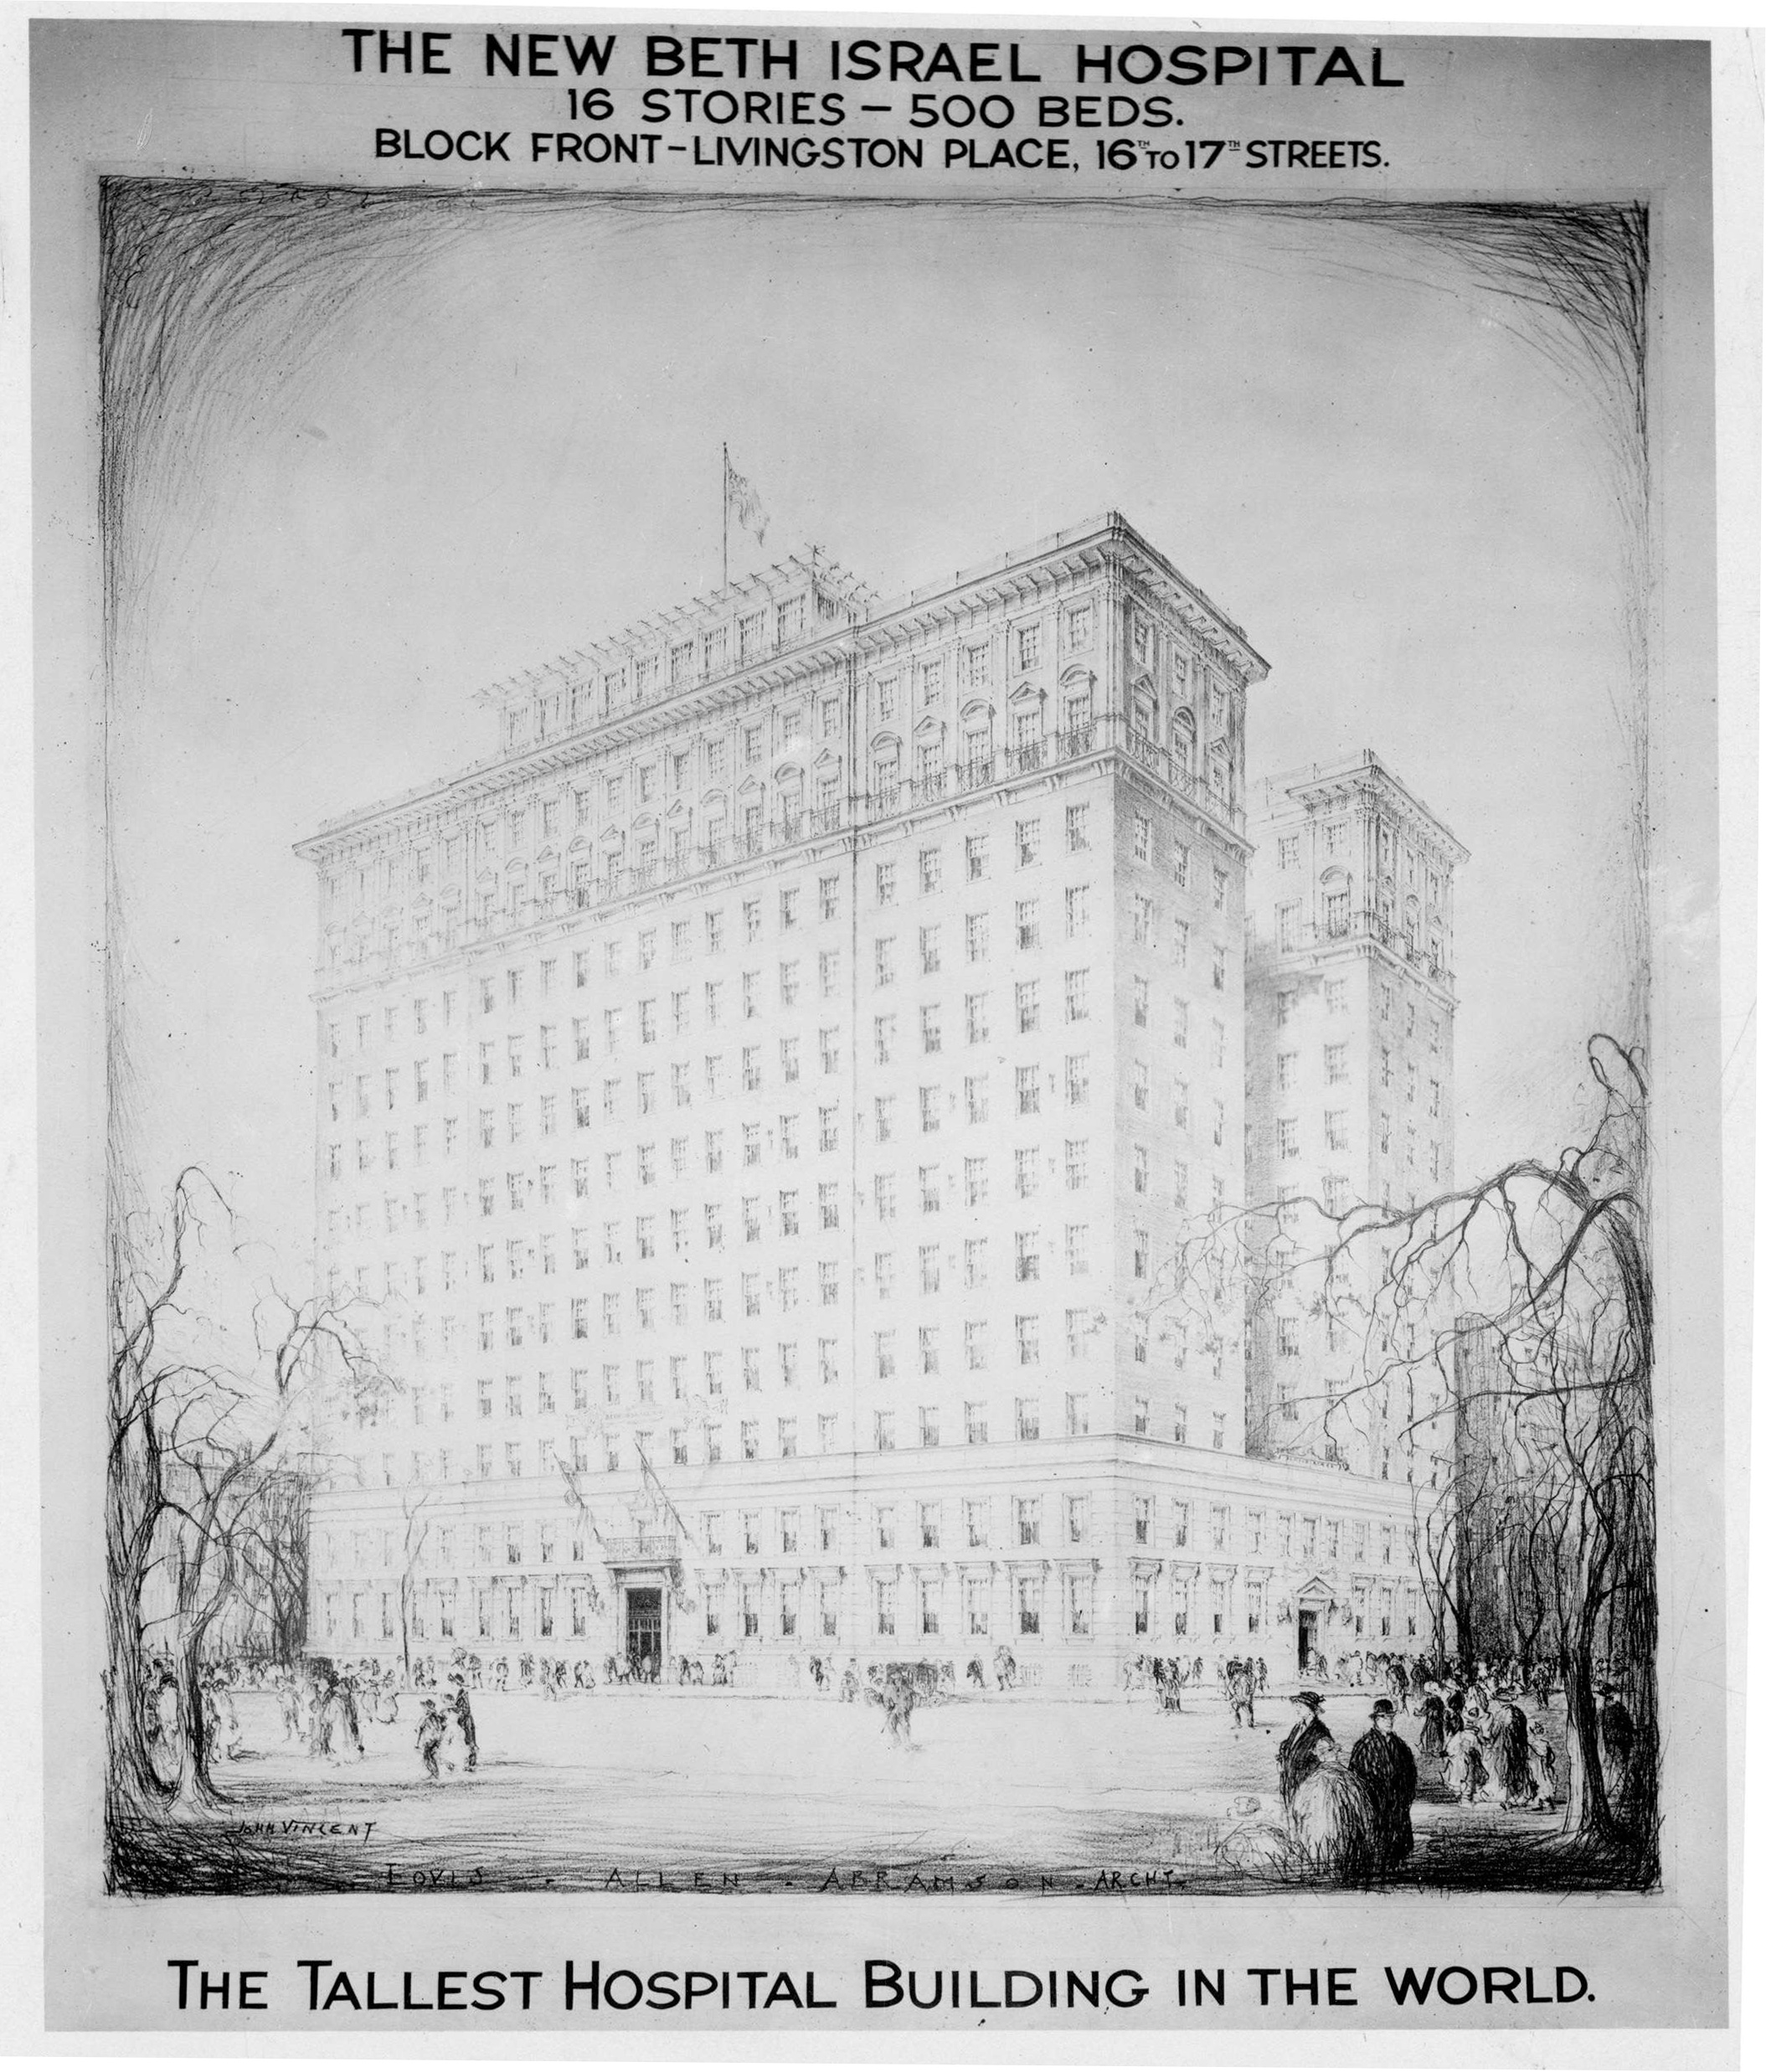 Flyer with sketch of 16-story building with text that reads: "The New Beth Israel Hospital, 16 Stories, 500 Beds, Block Front, Livingston Place, 16th-17th Streets, the Tallest Hospital Building in the World" 